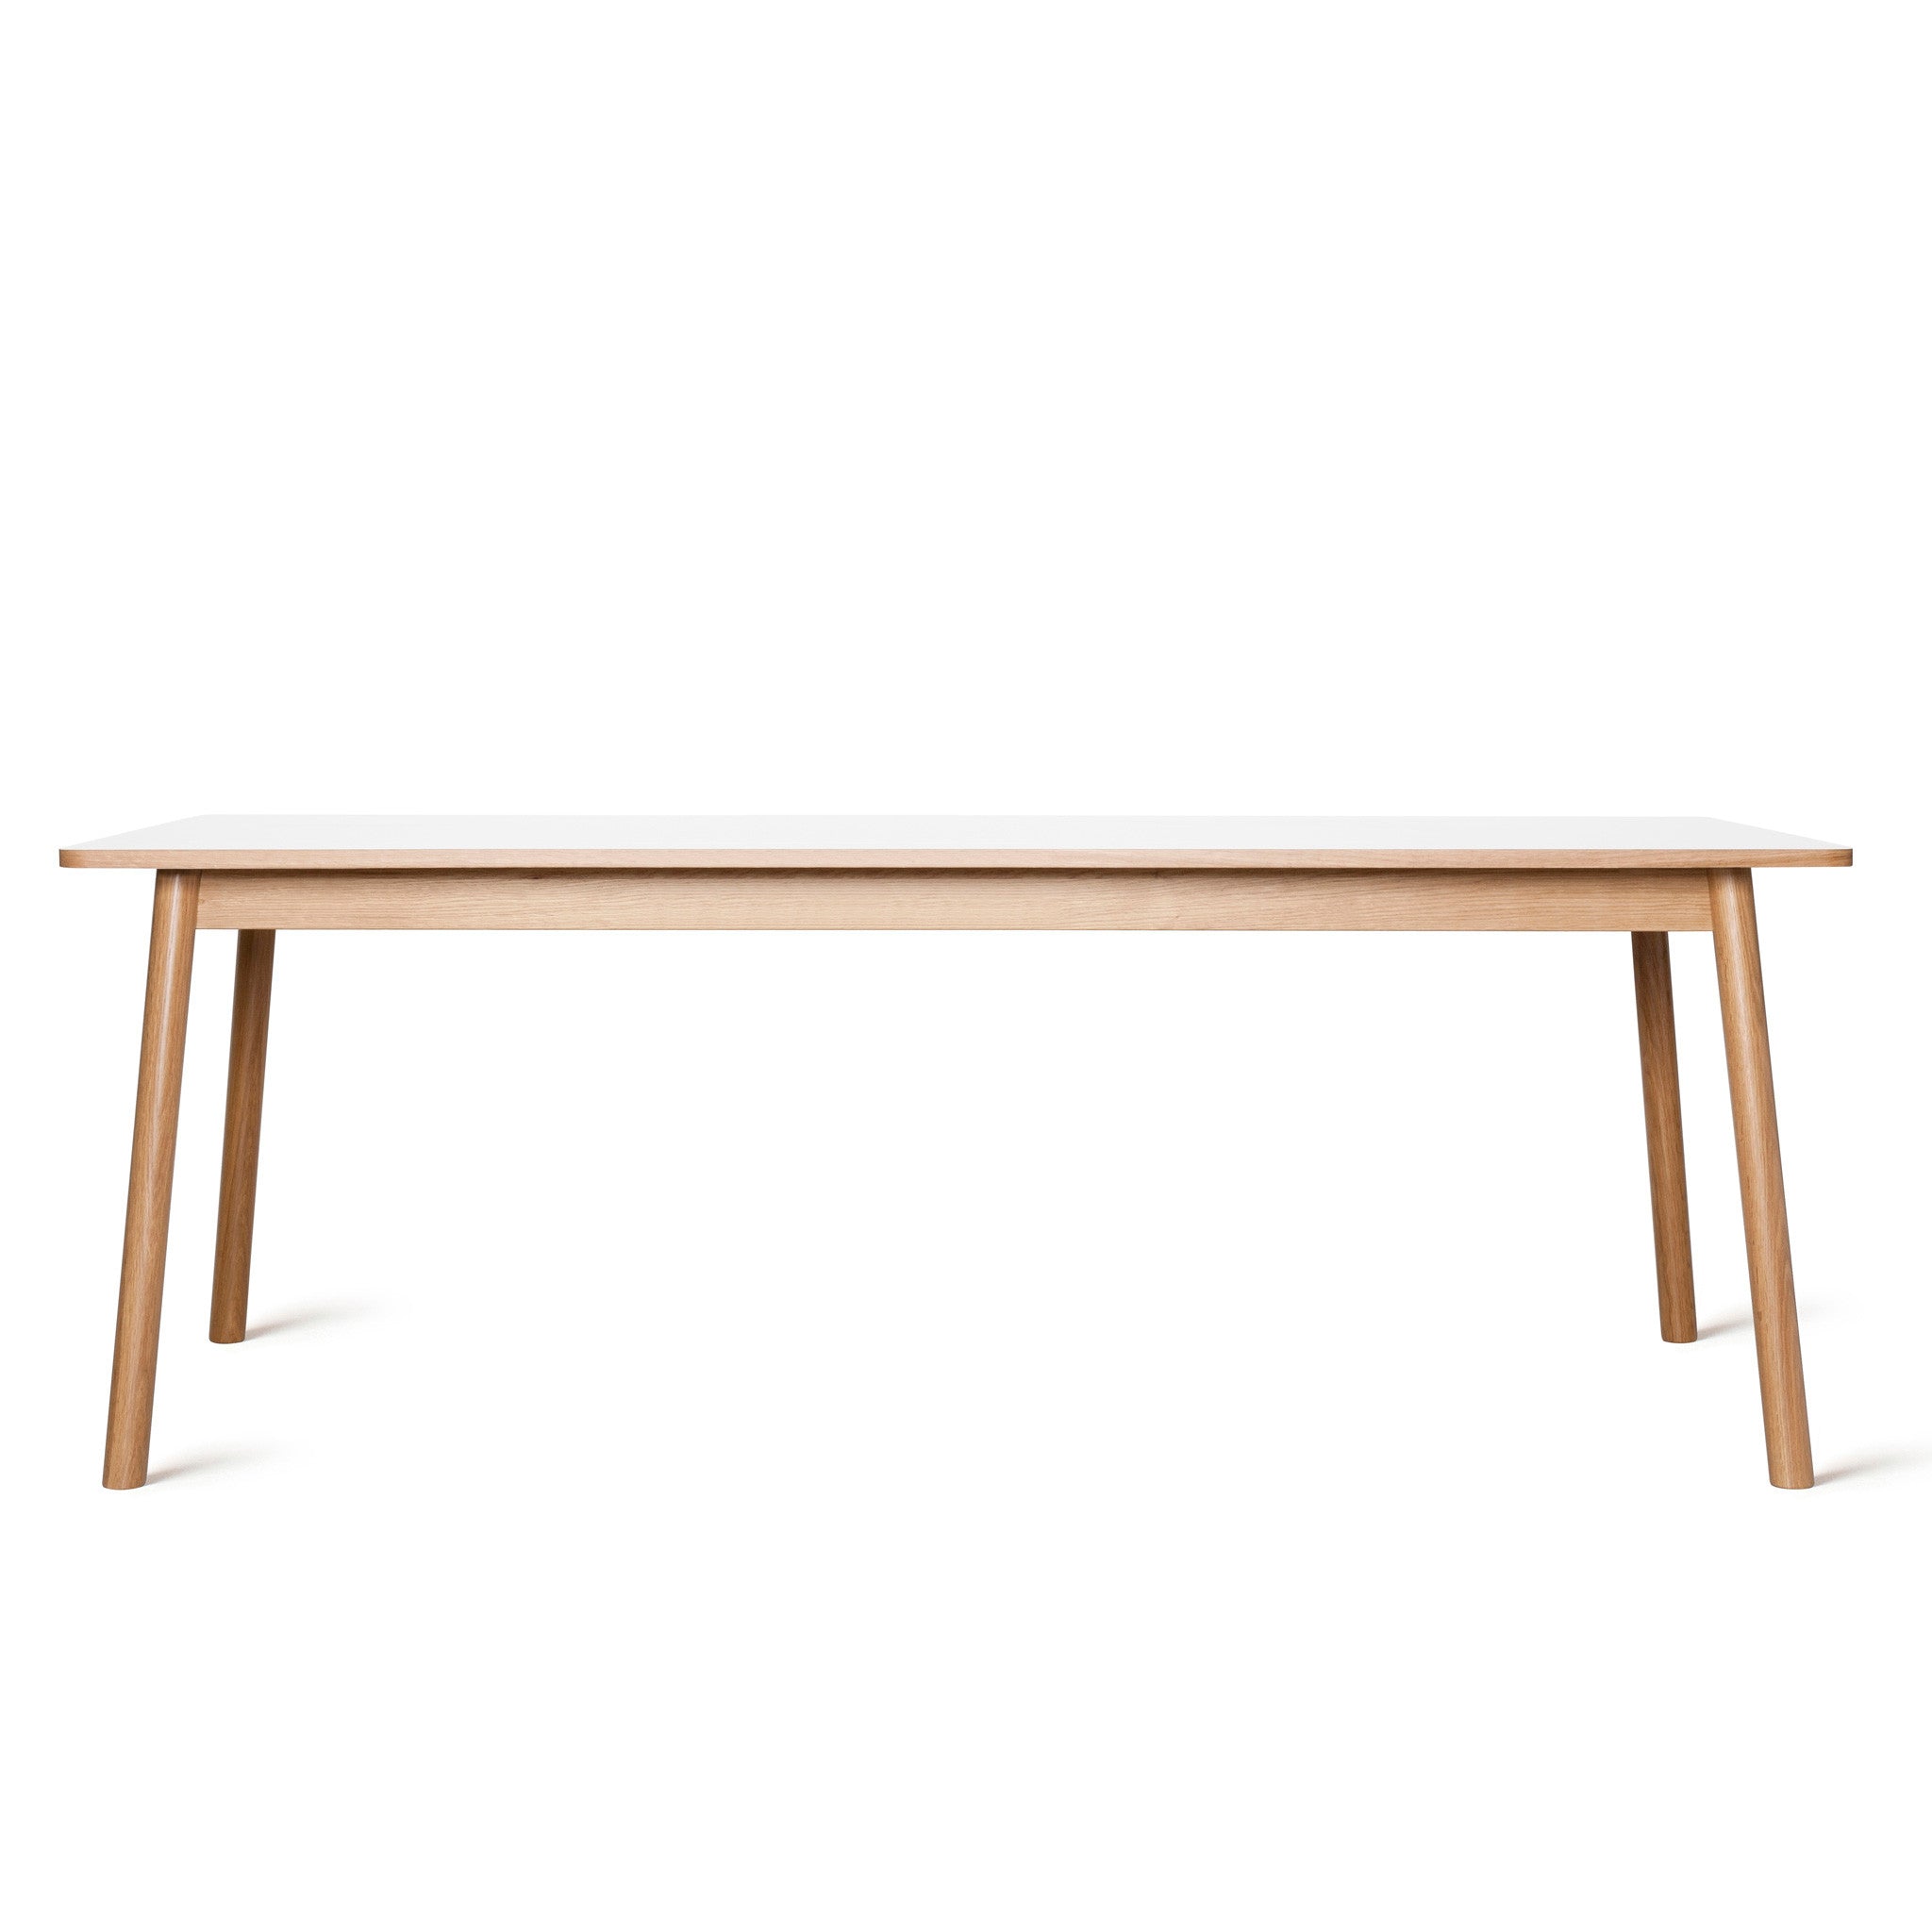 Dino 200 Dining Table by Zweed